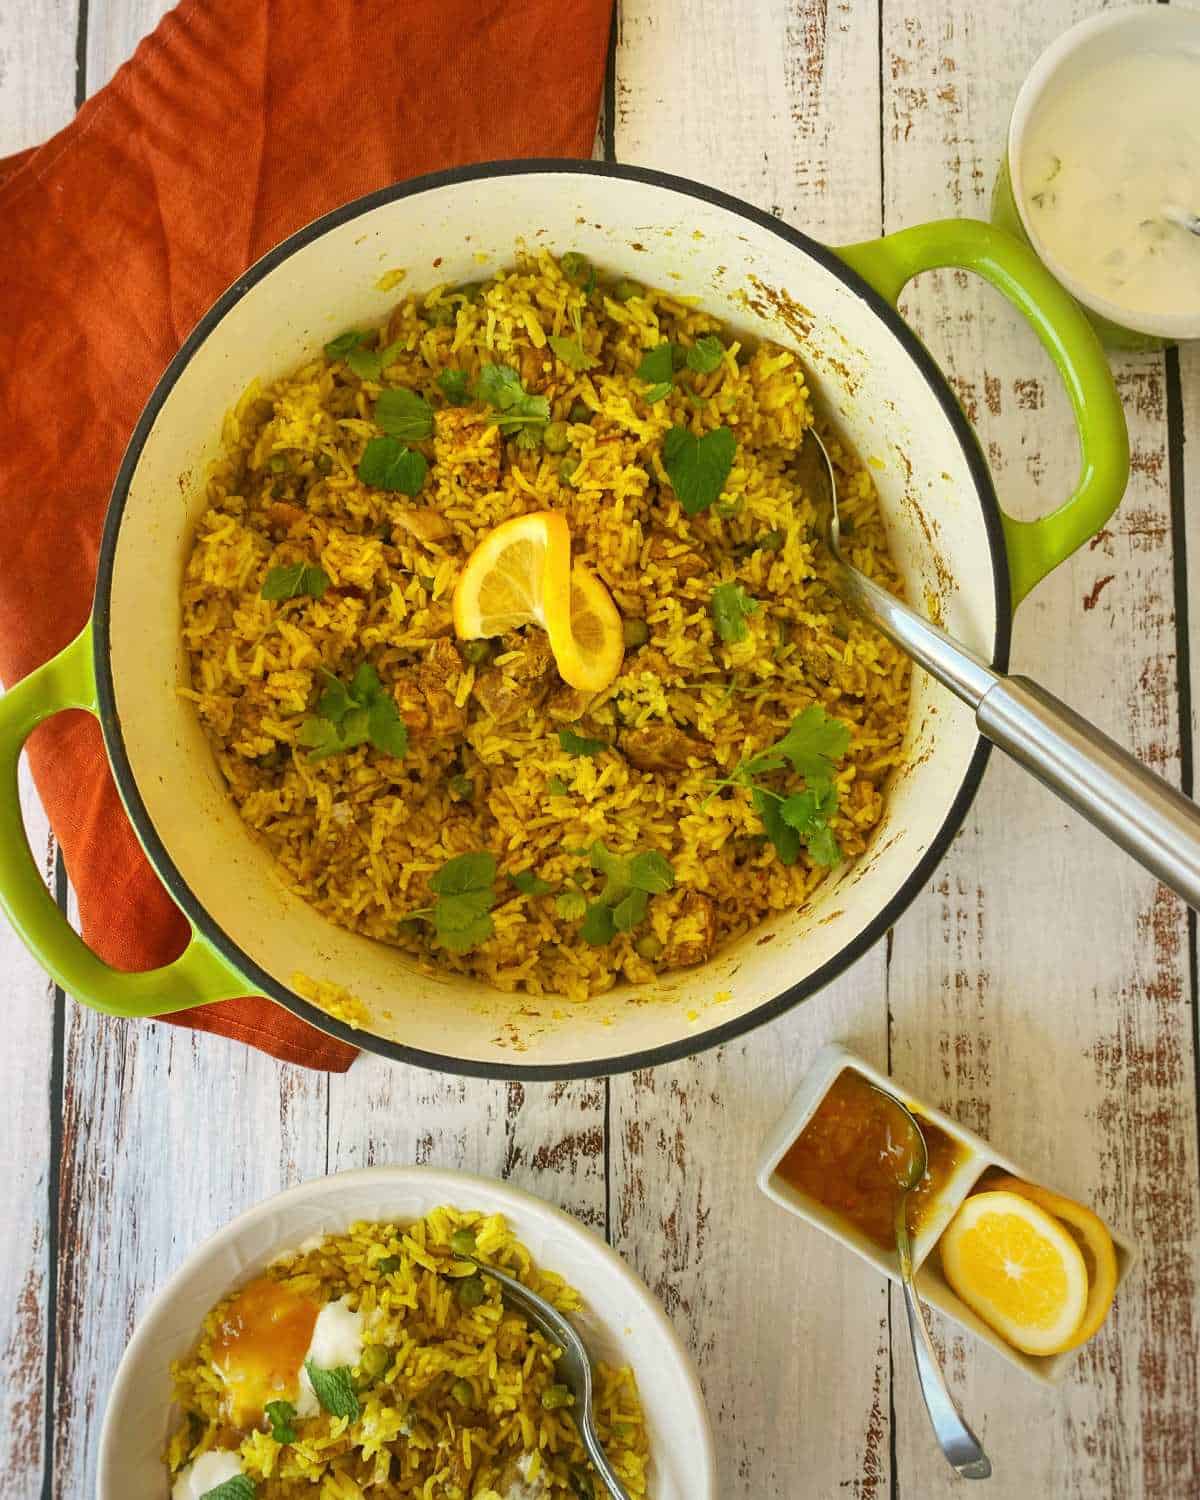 Cooked Chicken Biryani served in a round ceramic dish with a slice of lemon and scattered coriander on the top.